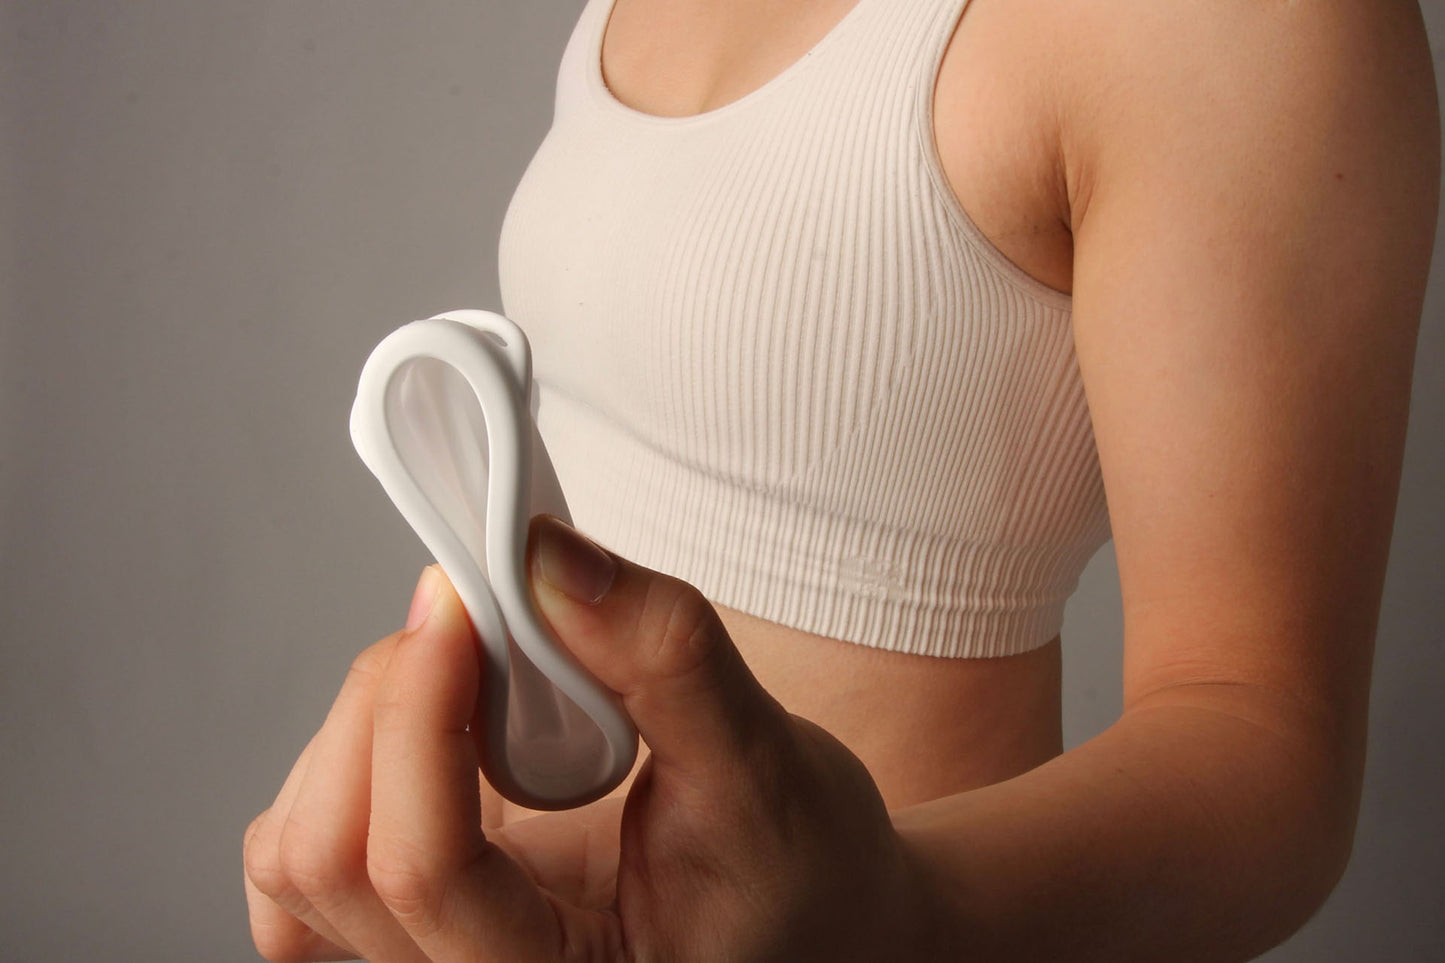 Period Cup and Menstrual Disc Tips and Tricks